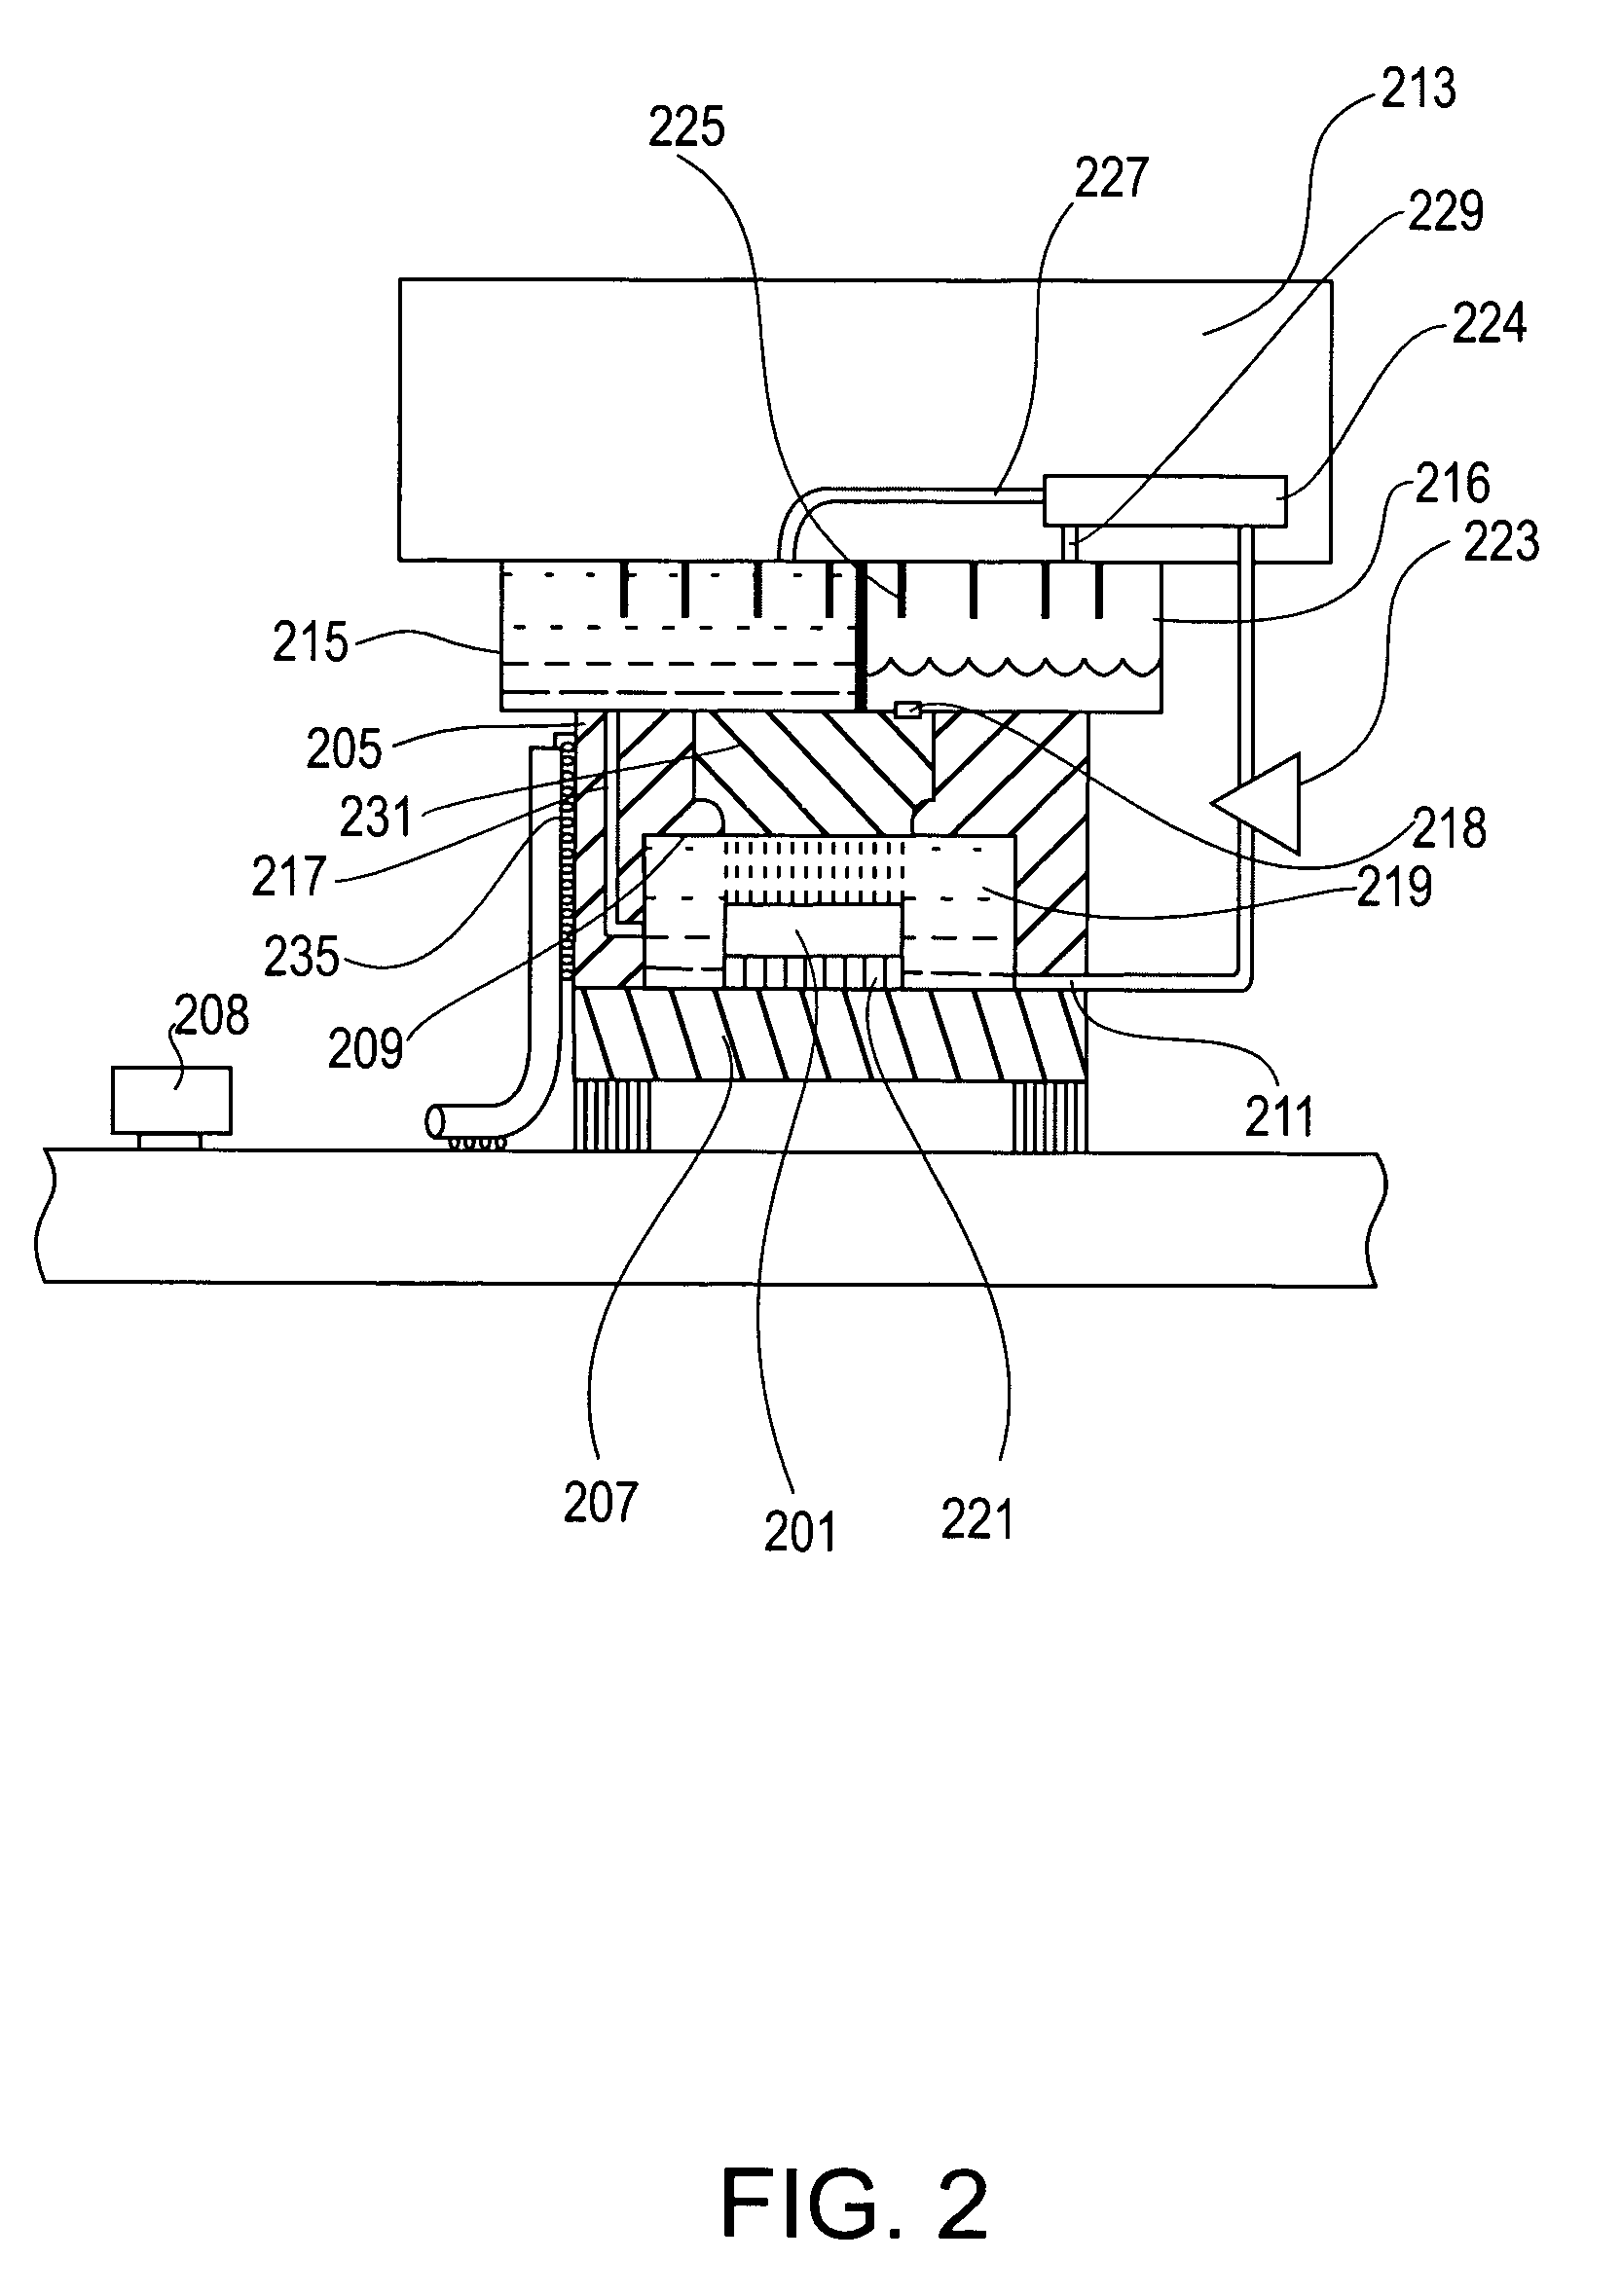 Two-fluid spray cooling system